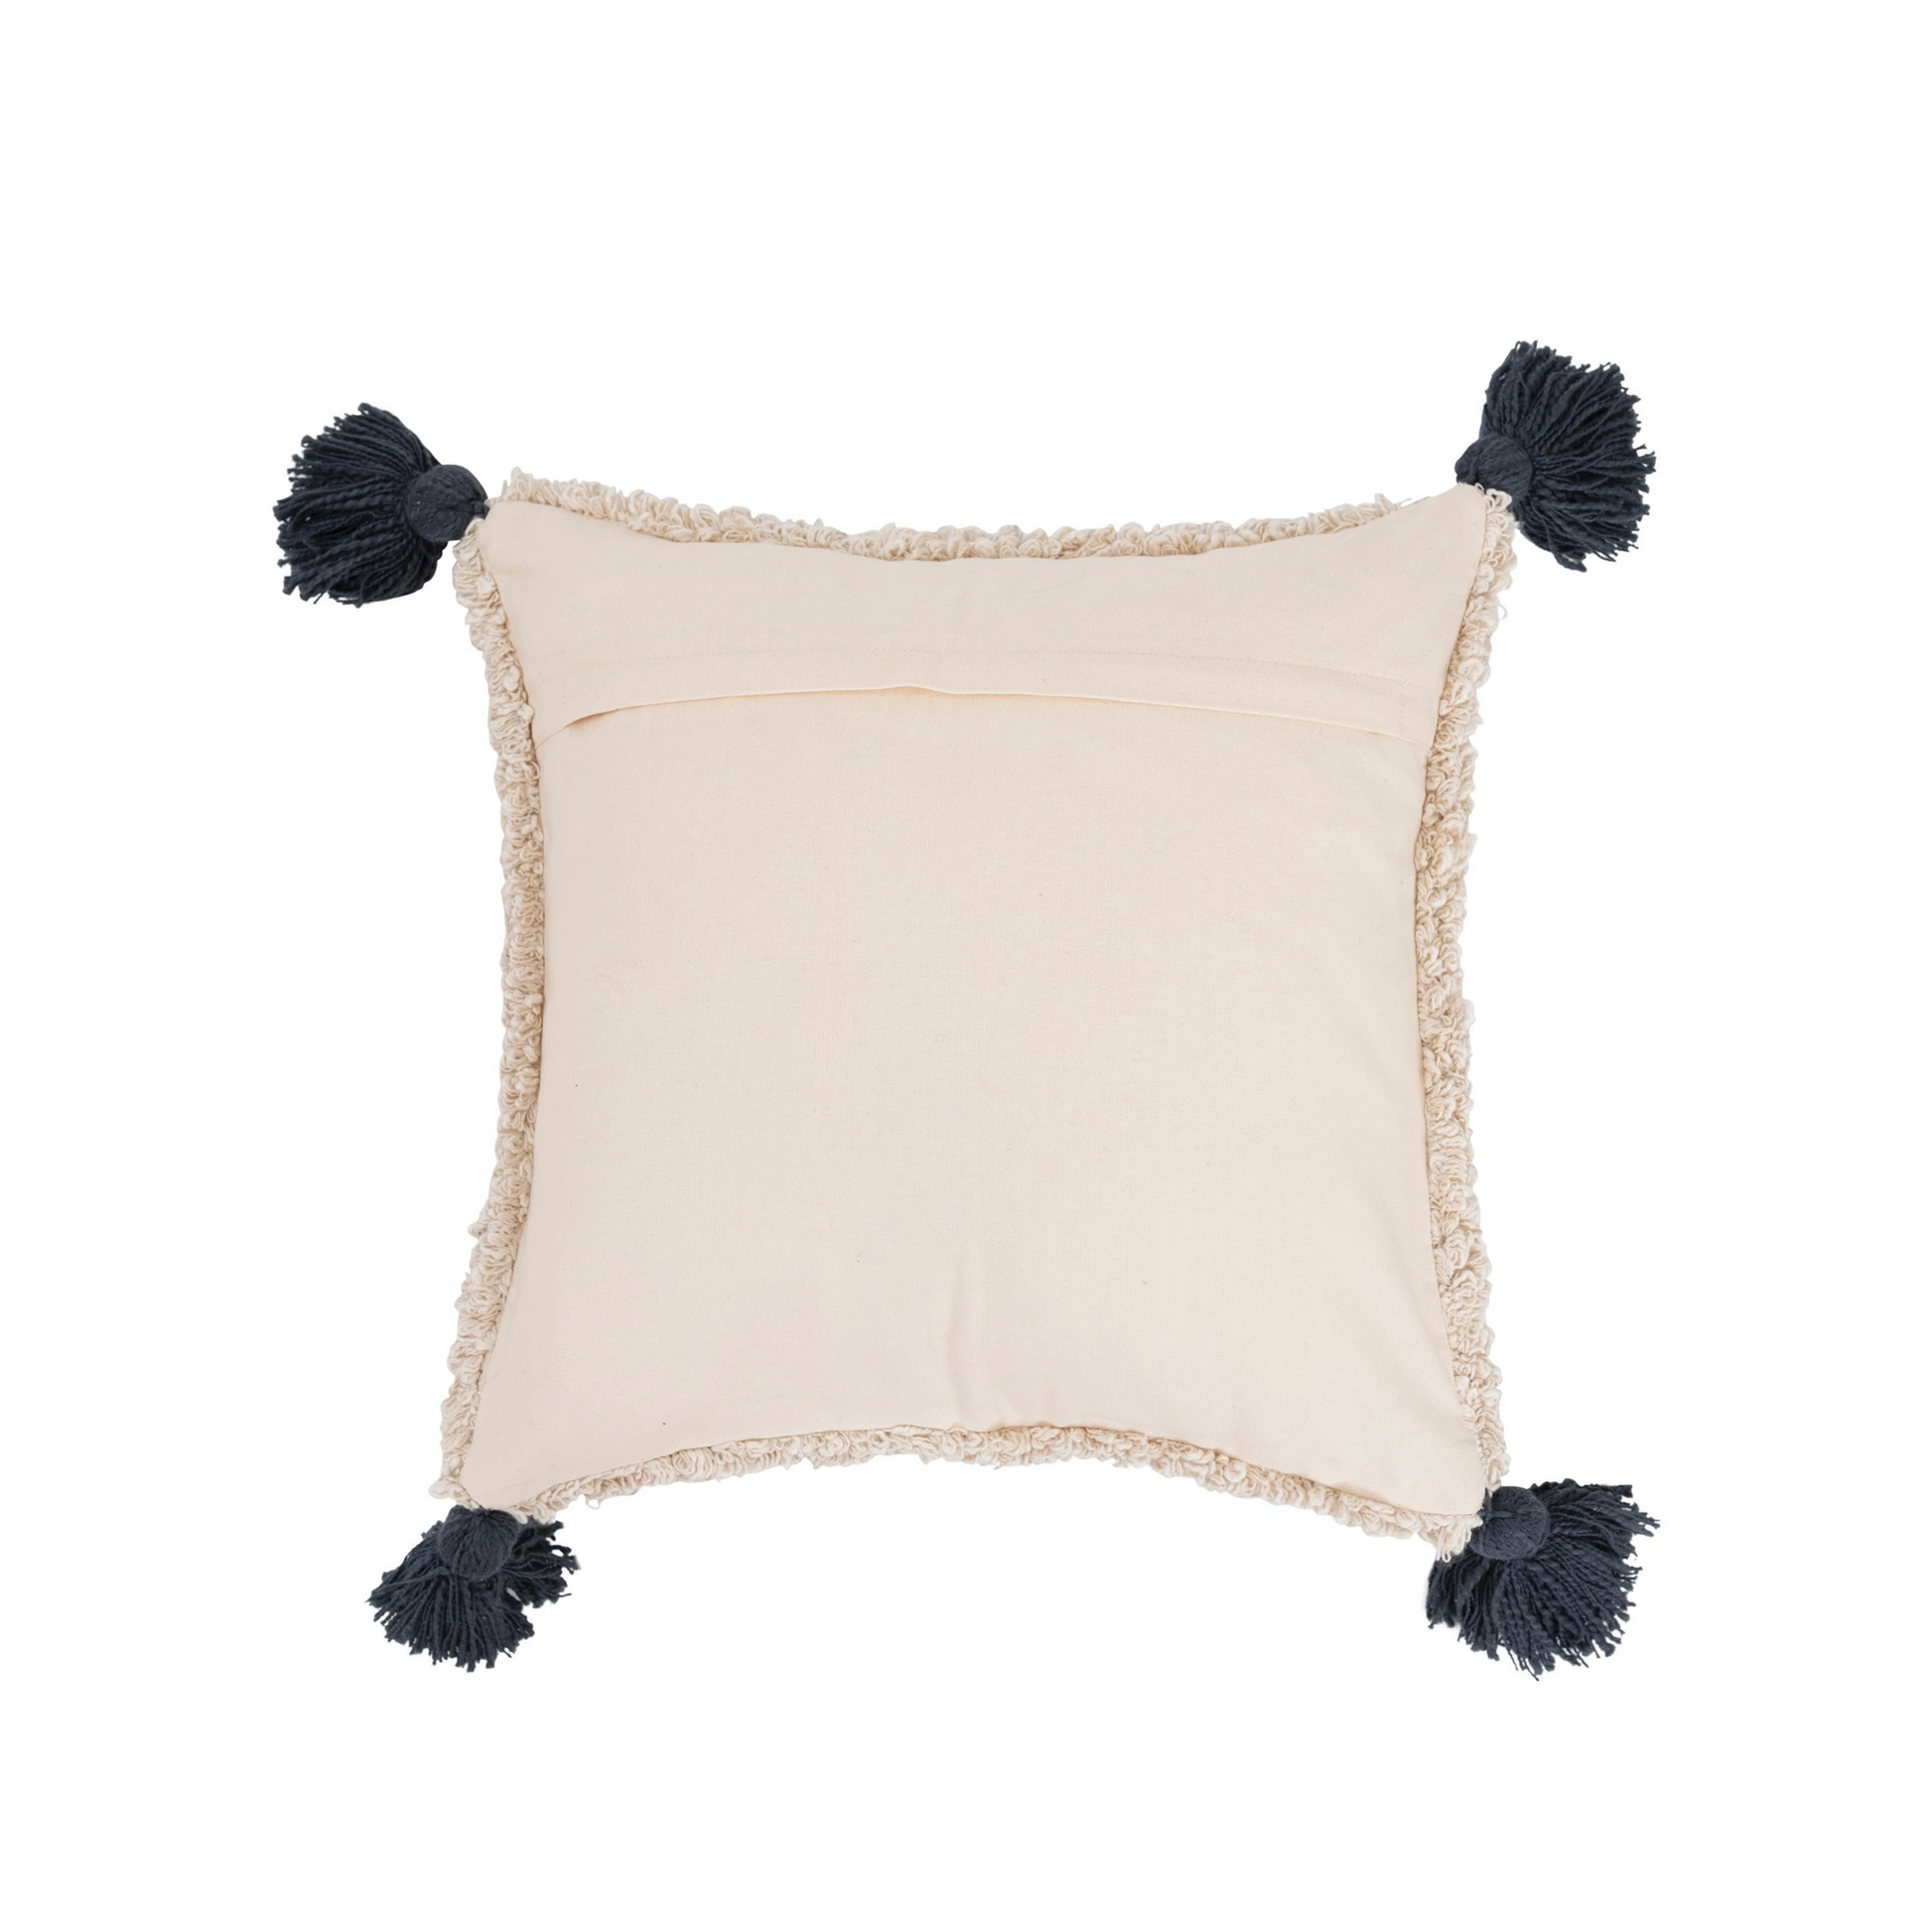 Cotton Punch Hook Pillow - Bee and Tassels - 16-in - Mellow Monkey